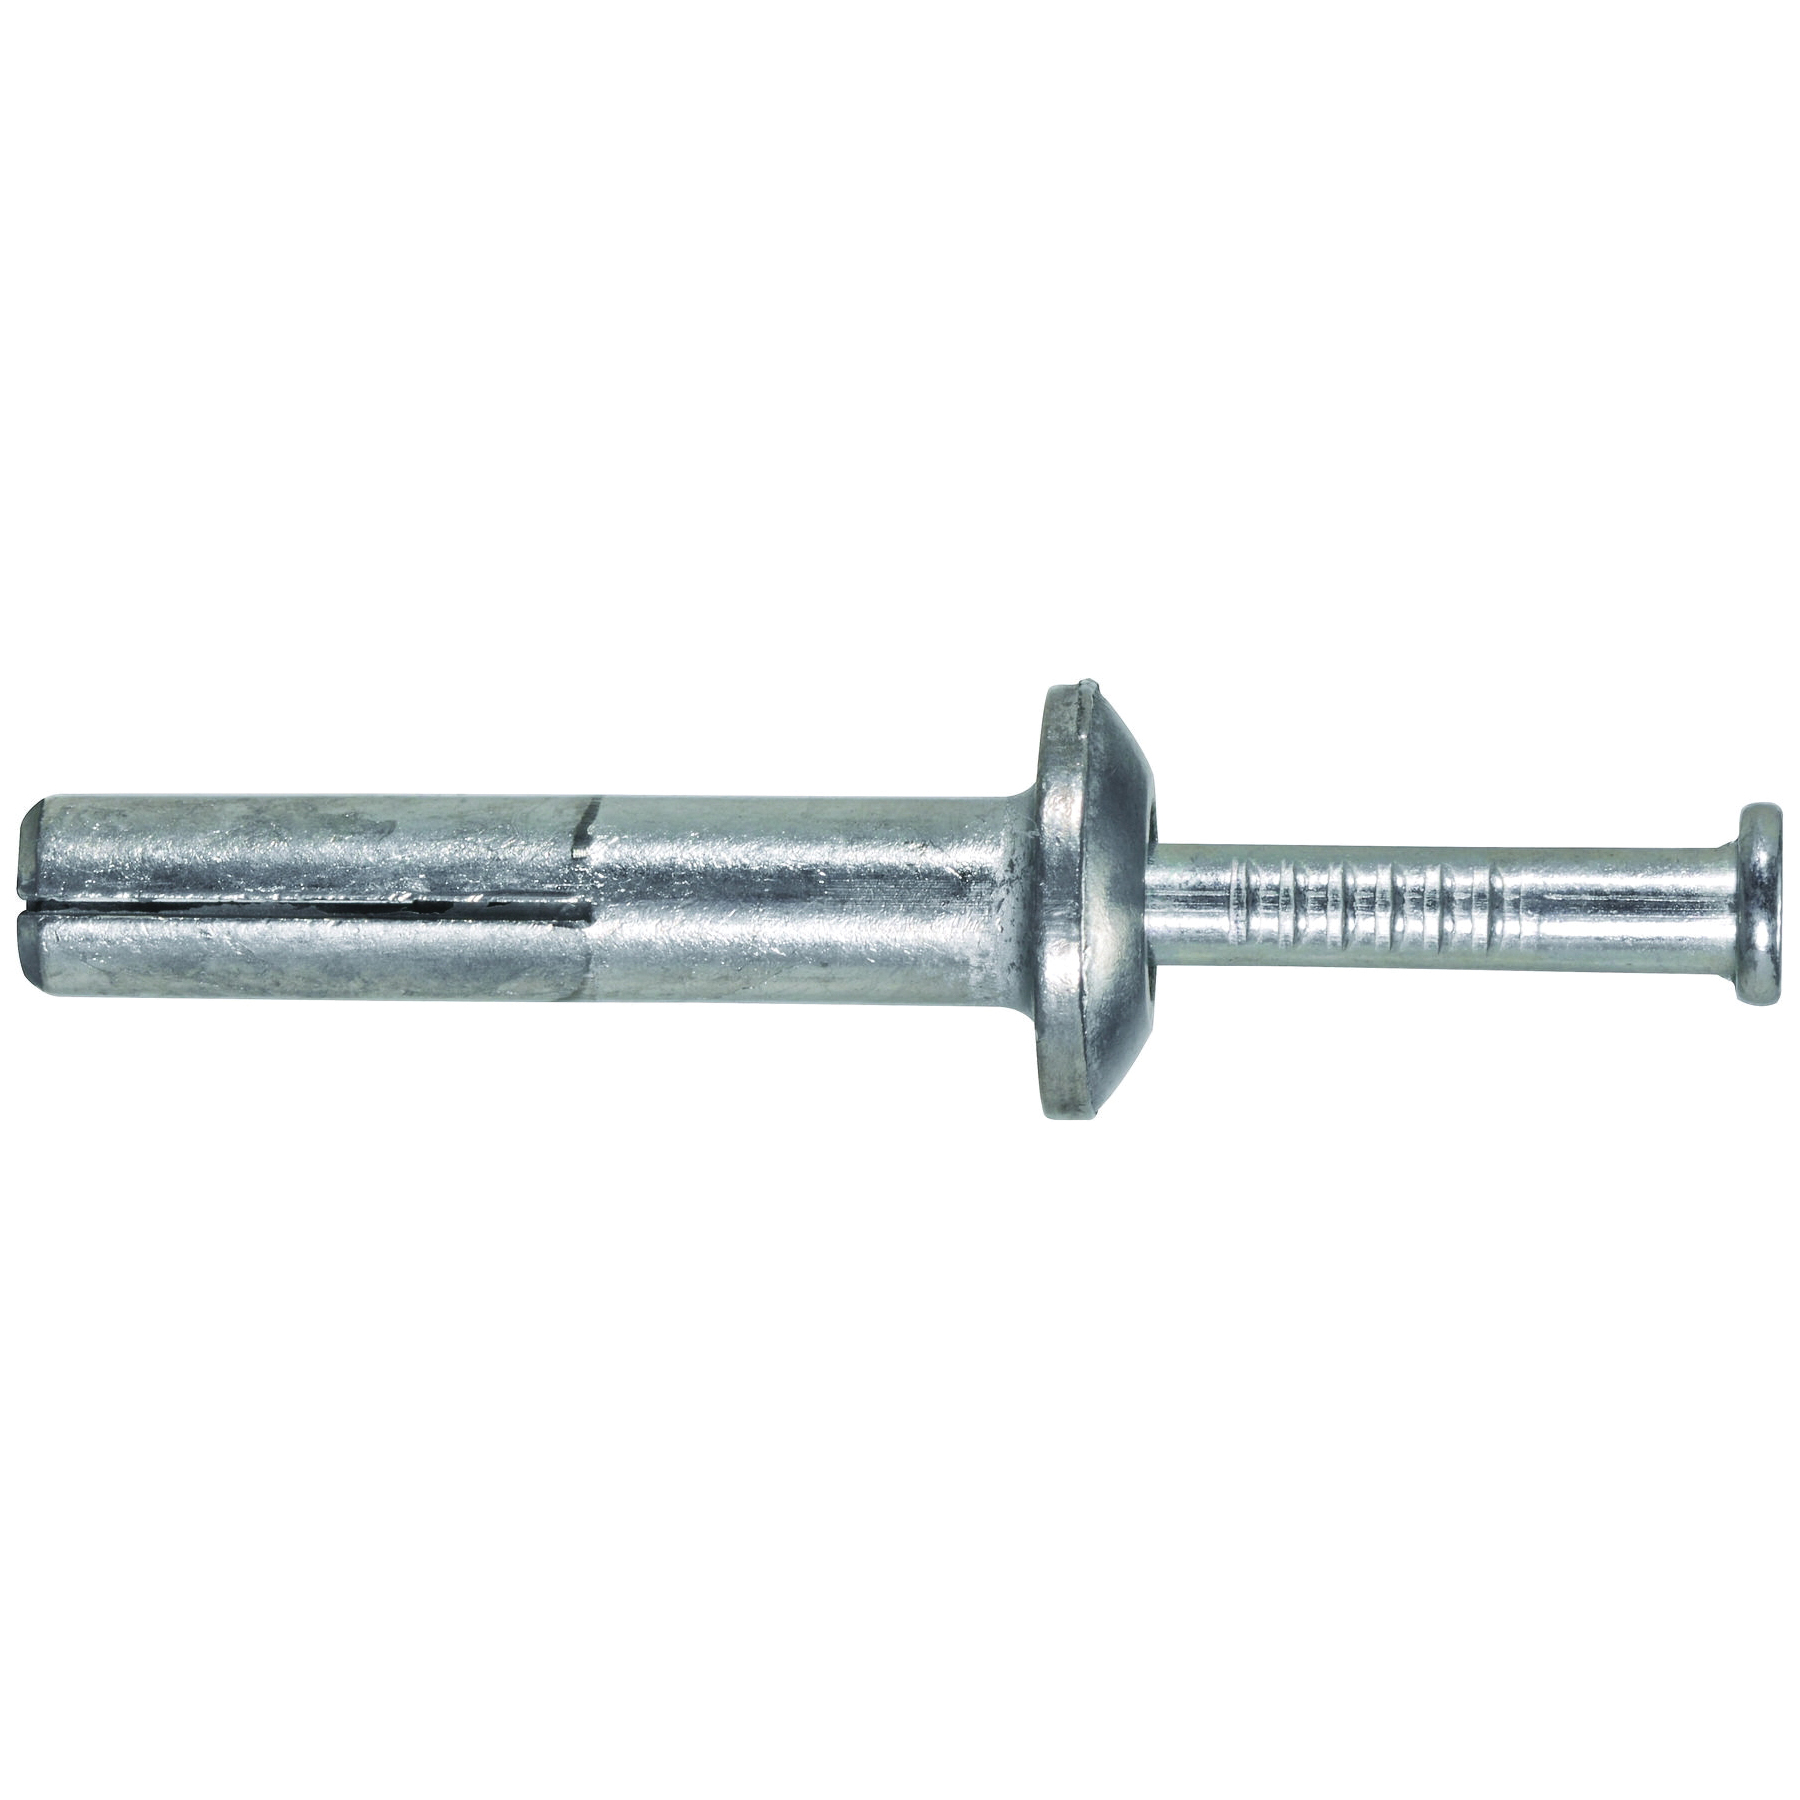 hilti anchors to steel